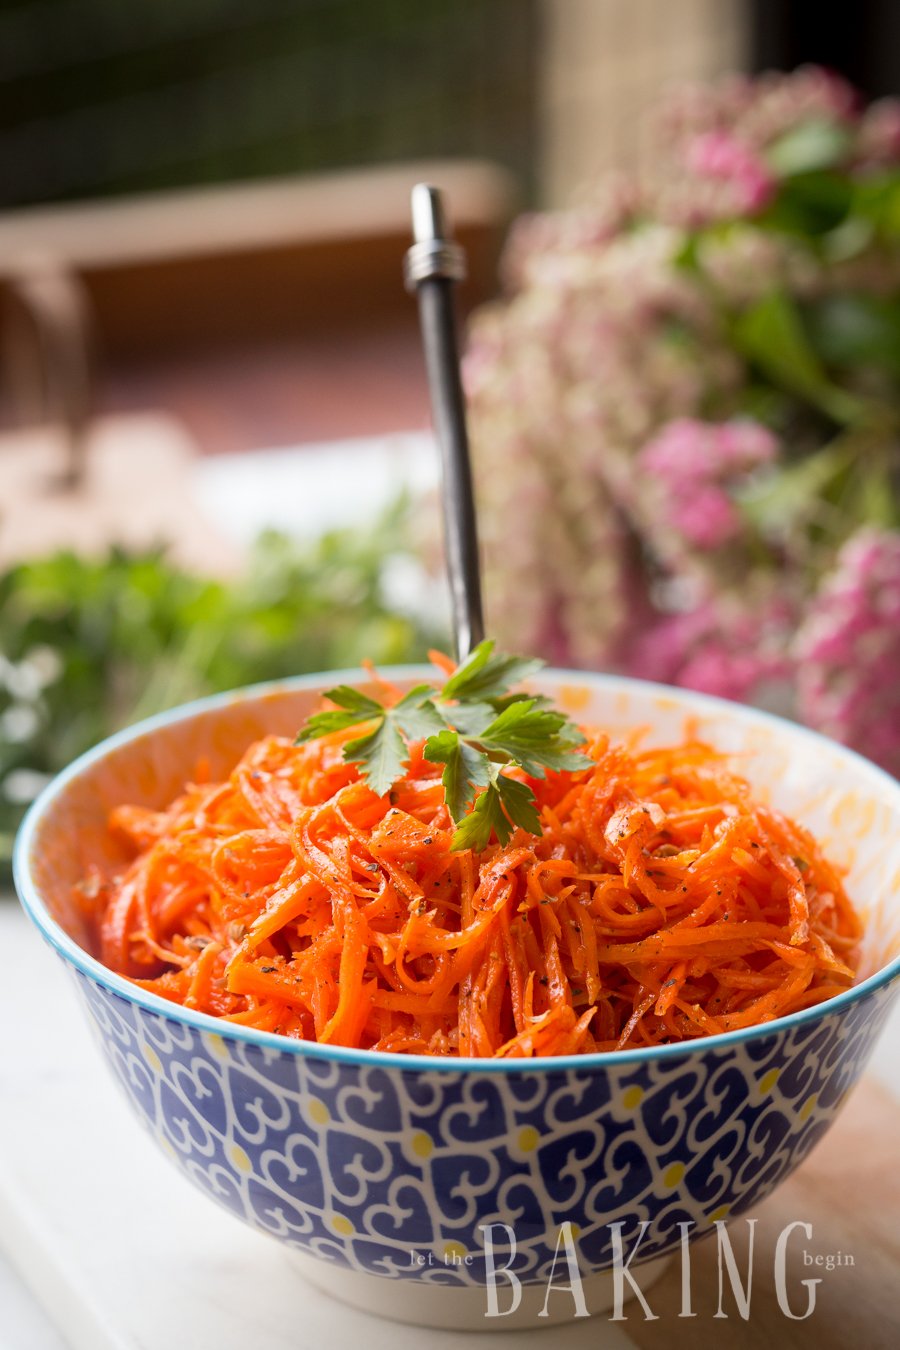 Spicy Korean carrots in a bowl with a metal spoon topped with parsley and grated black pepper.